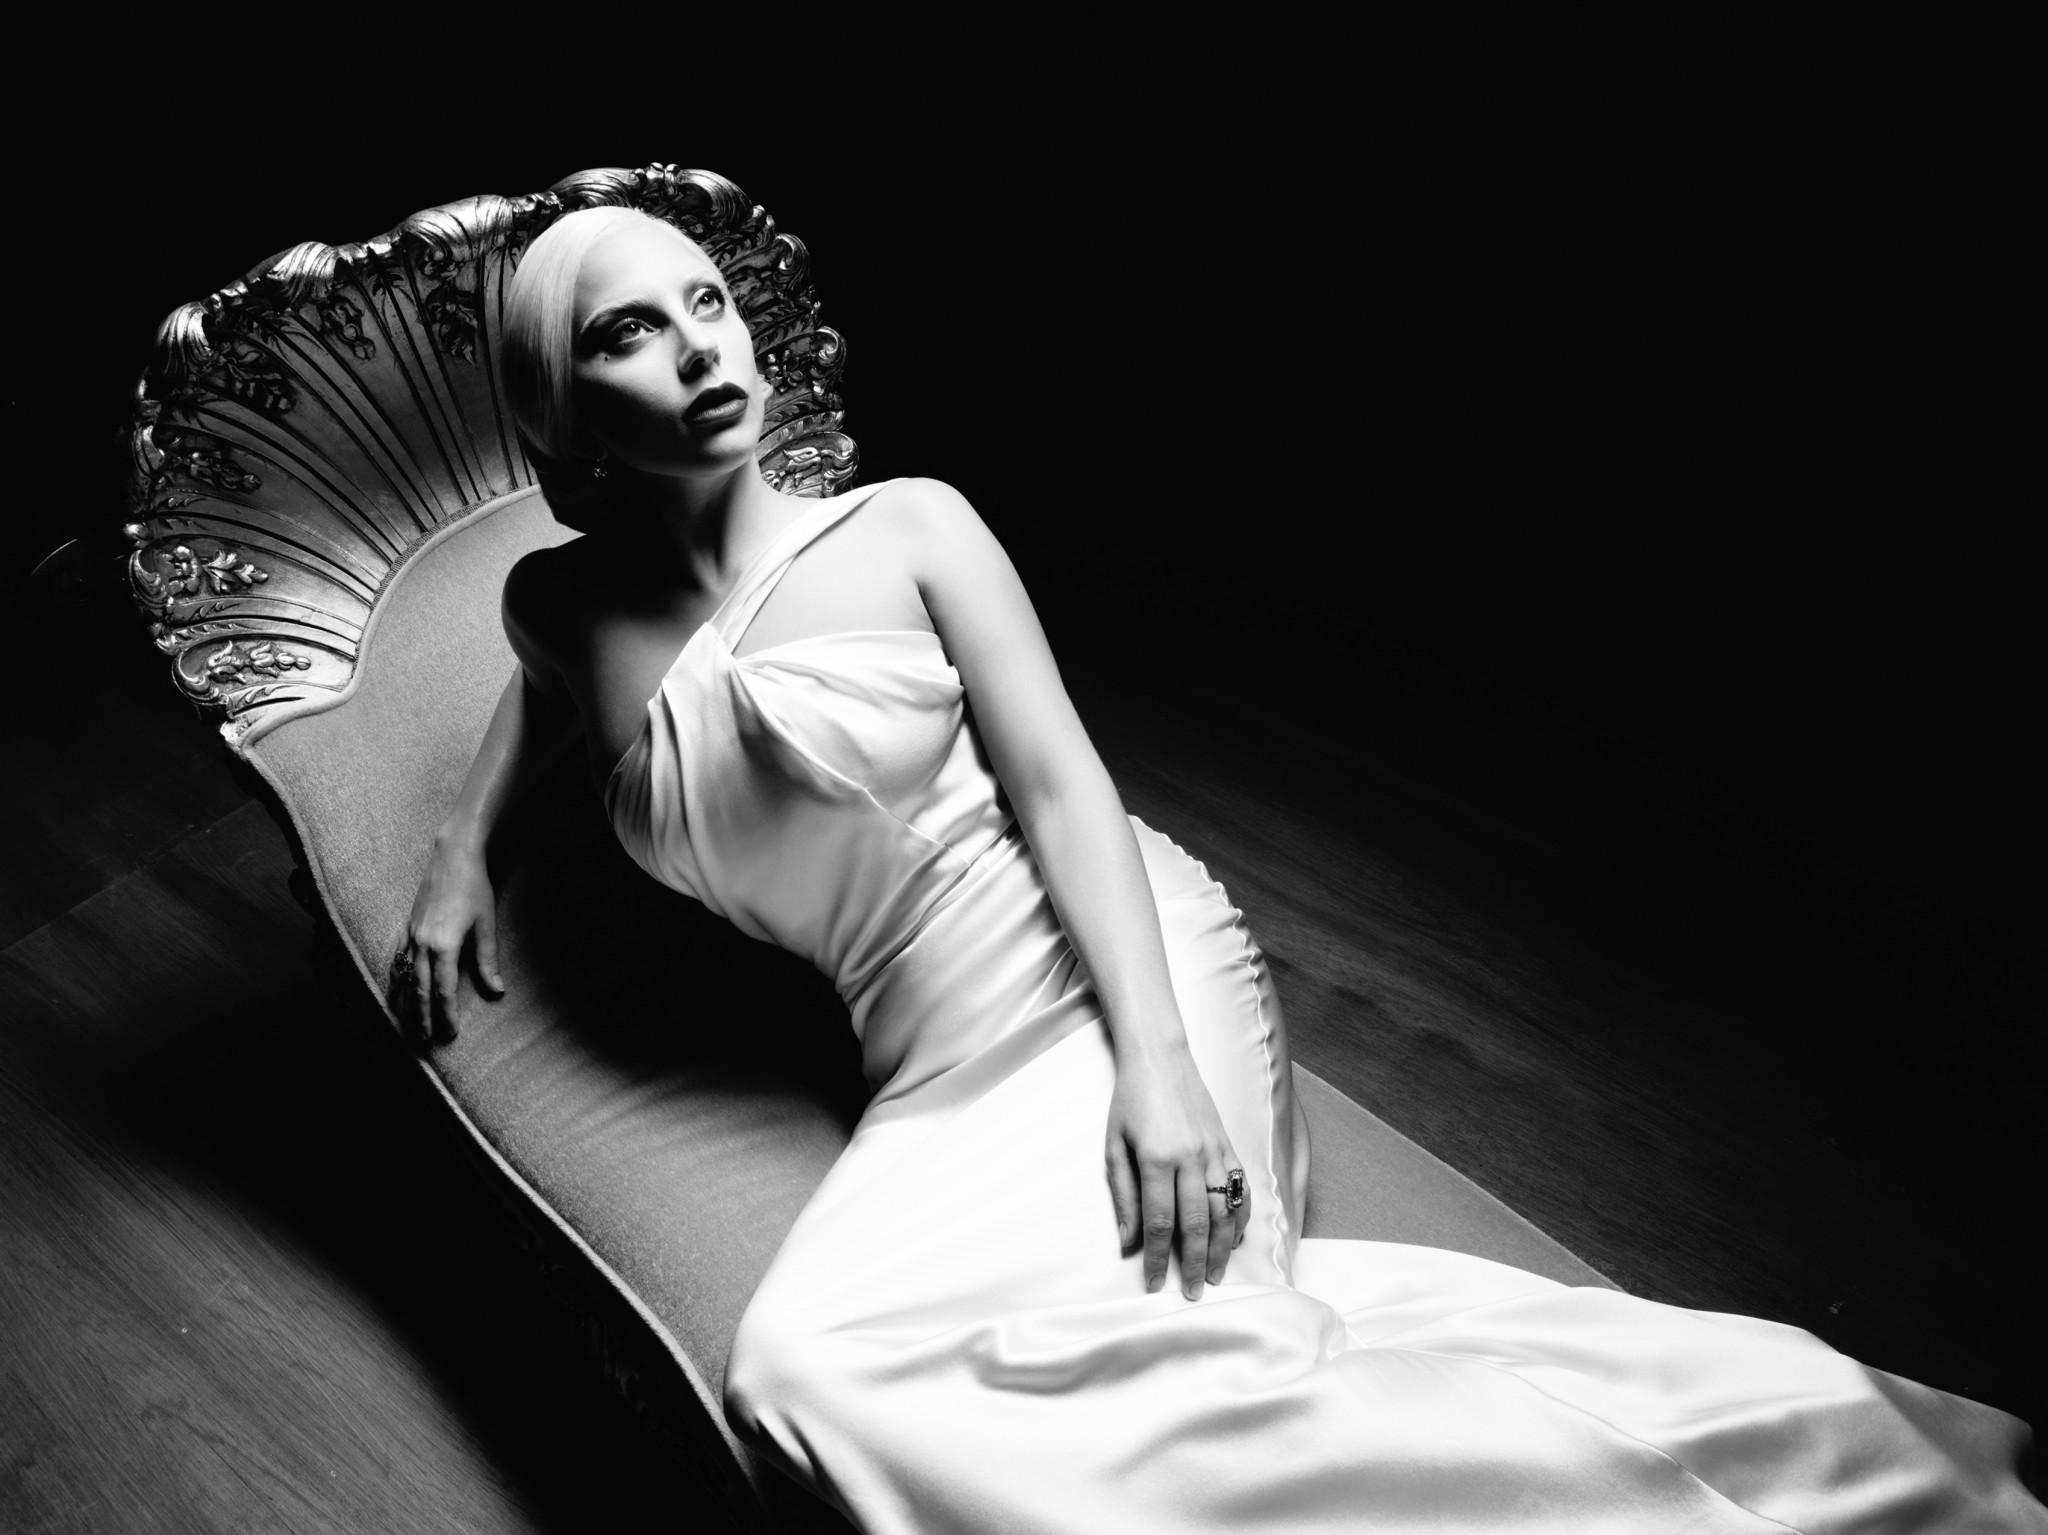 Pictured: Lady Gaga as The Countess. | Courtesy Frank Ockenfels/FX